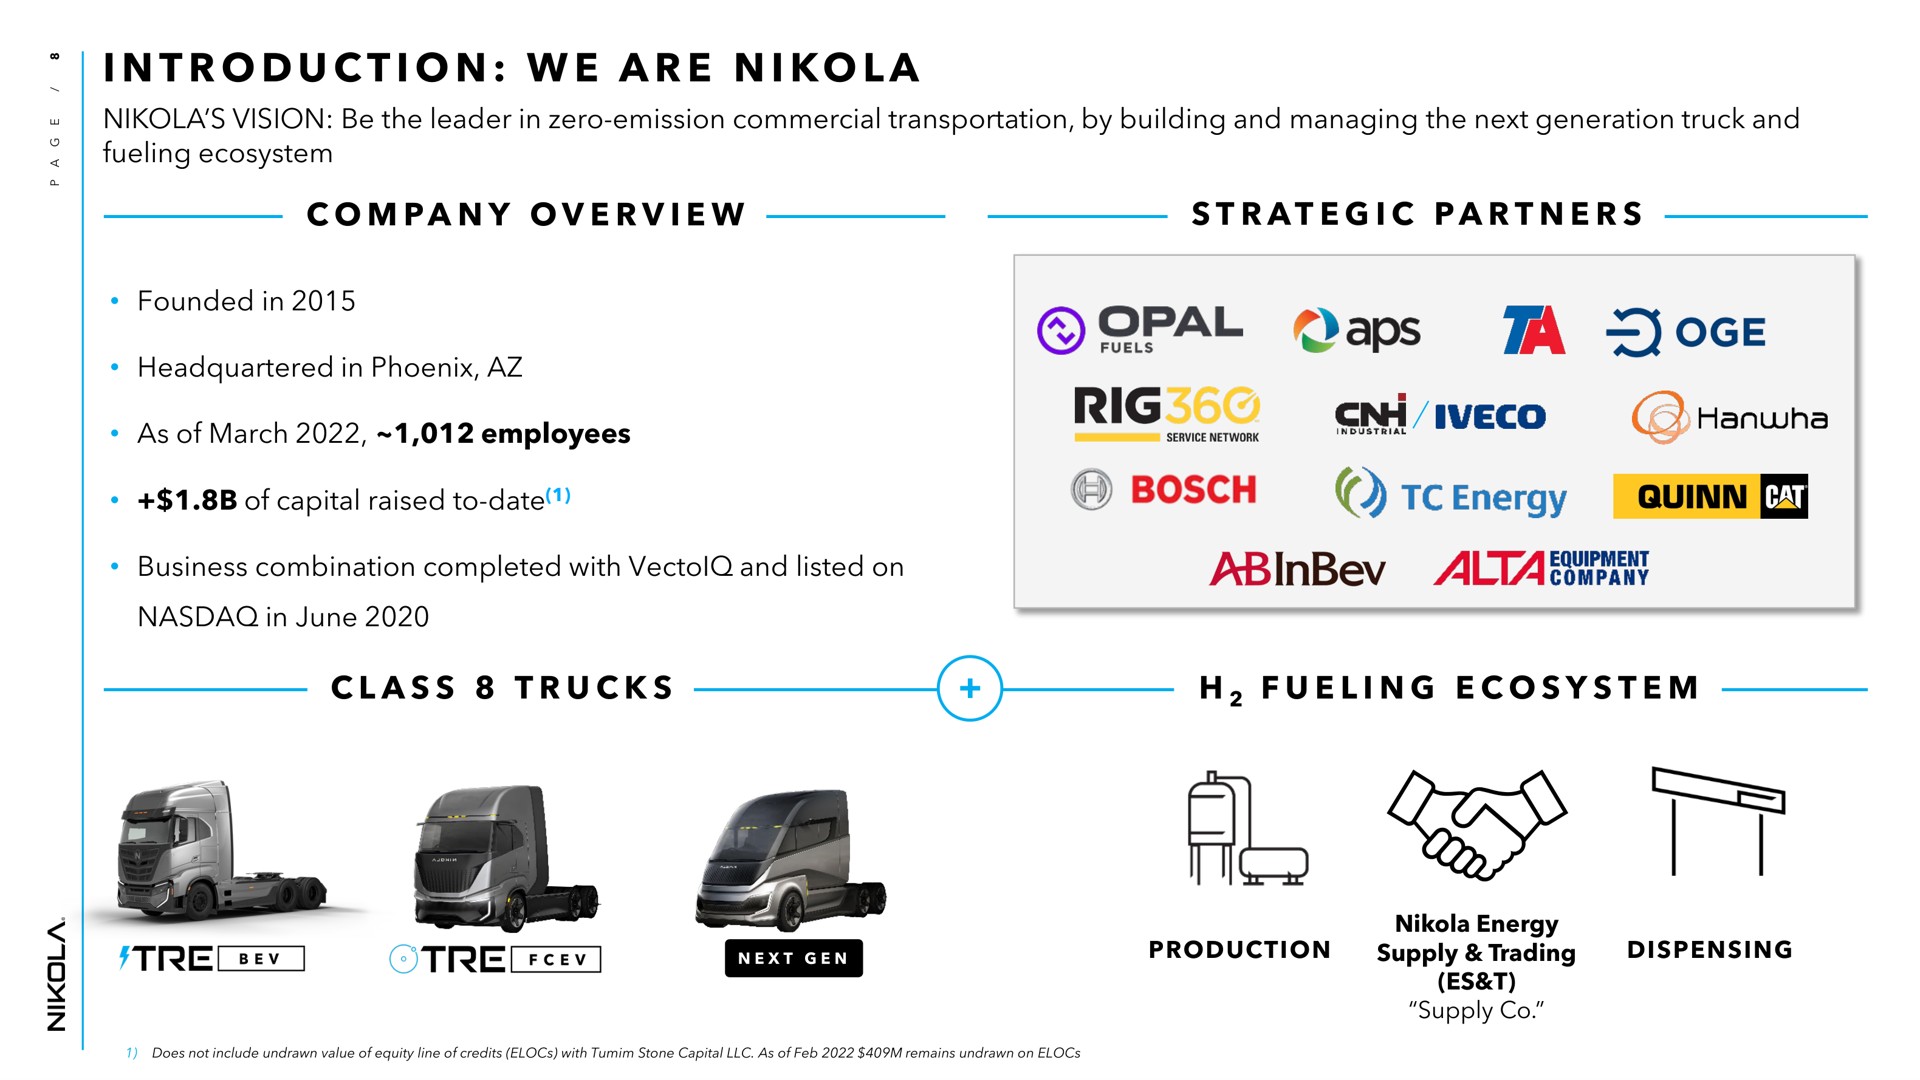 i i a i a a i a i a a i introduction we are fueling ecosystem company overview strategic partners opal maps of capital raised to date bosch energy cat business combination completed with and listed on class trucks fueling ecosystem trading production supply dispensing | Nikola